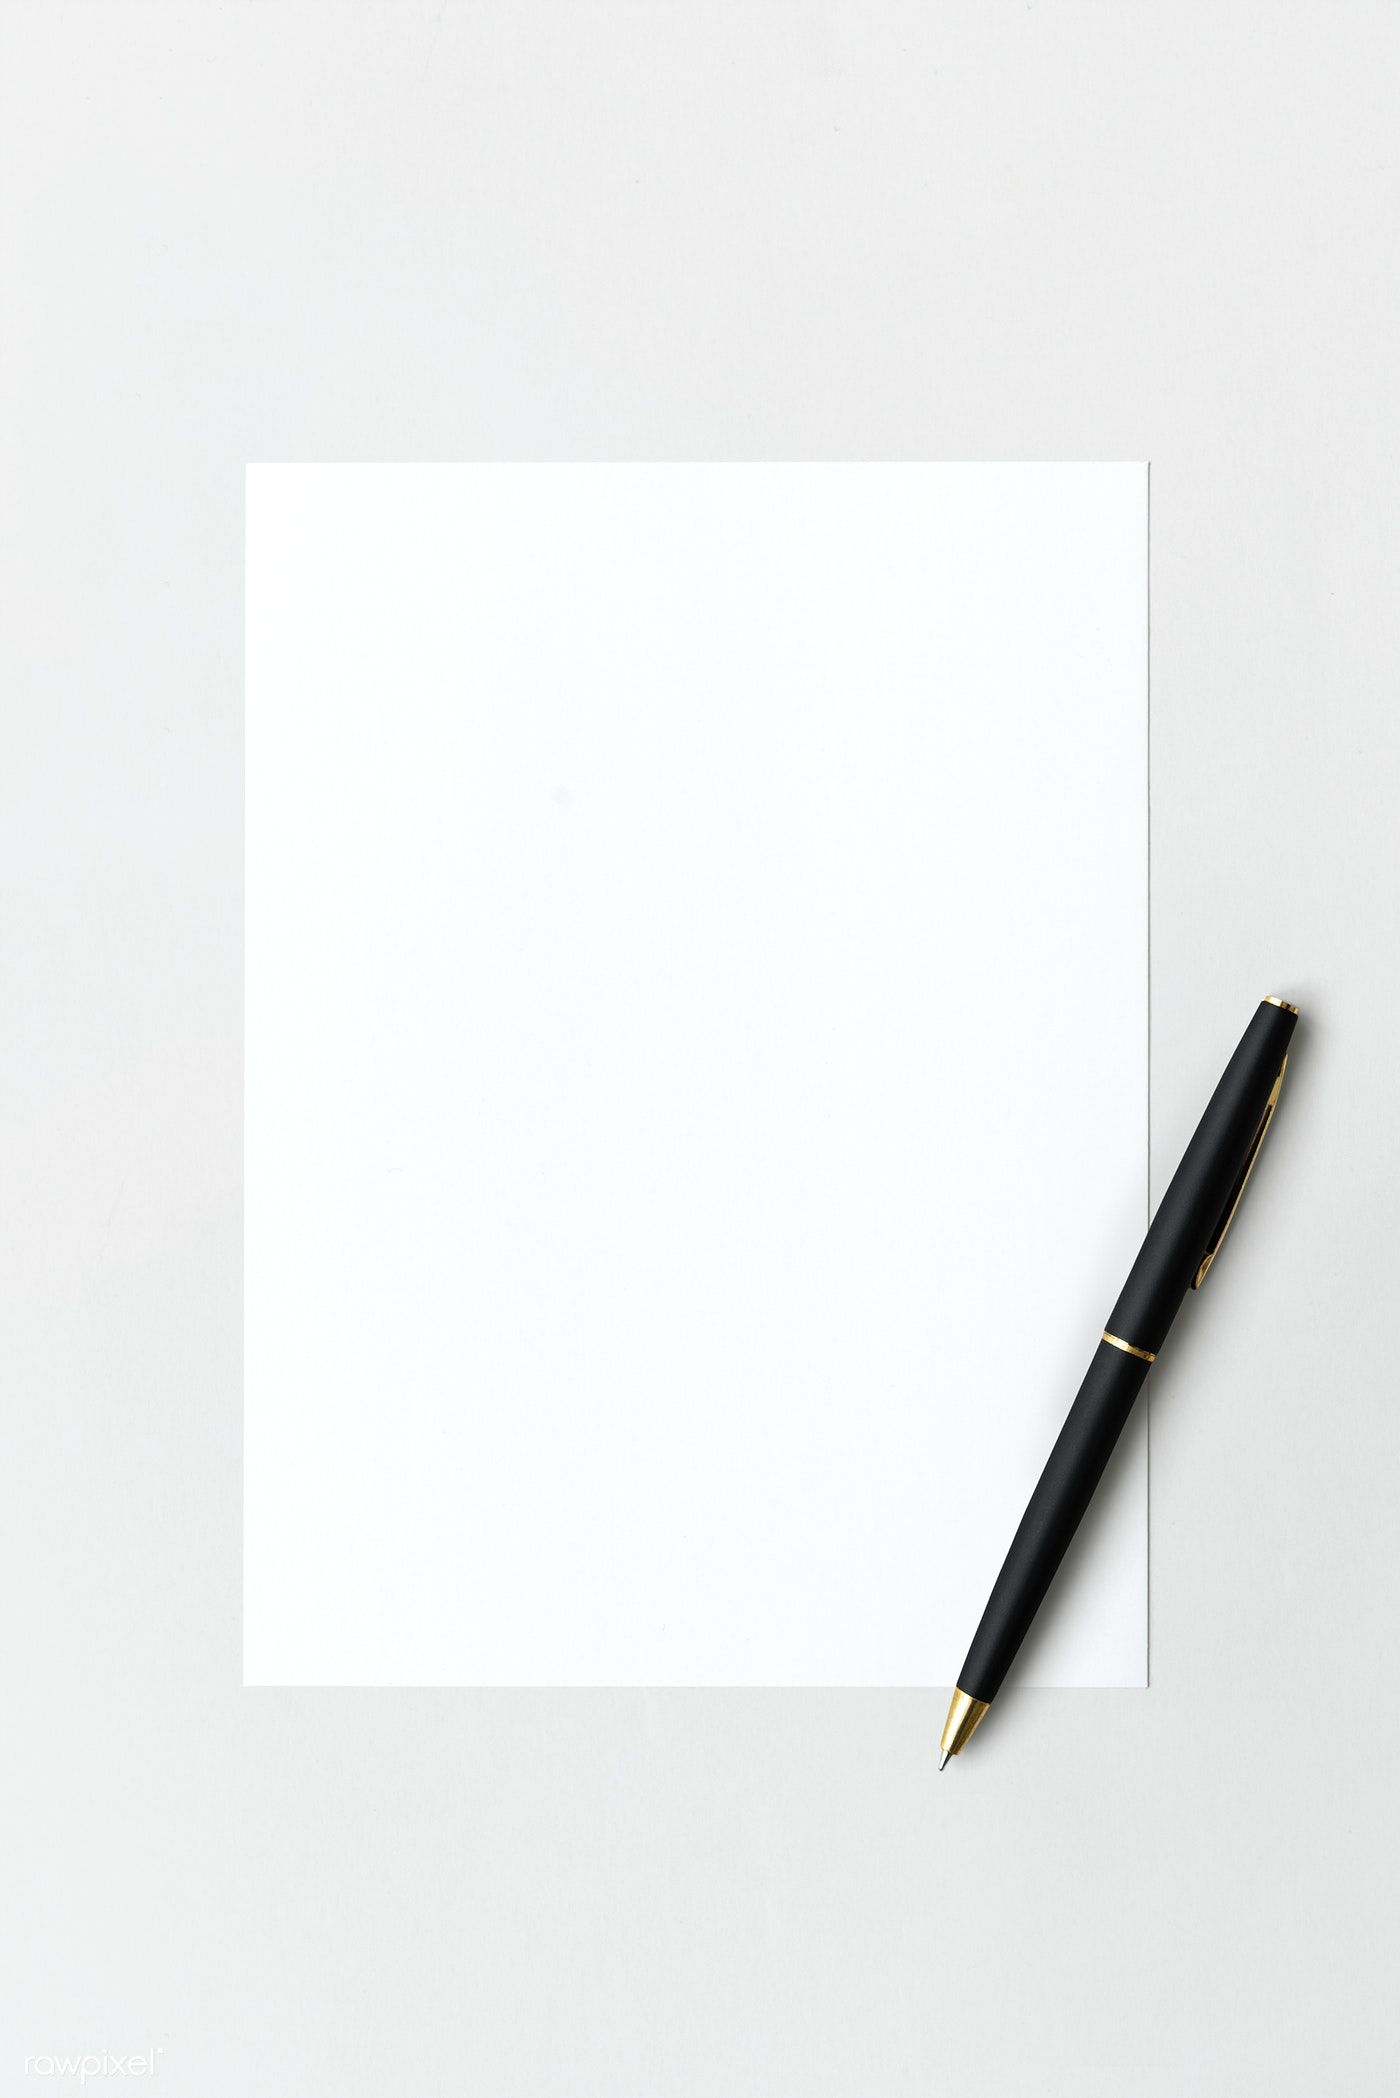 Download premium psd of Blank white paper with black pen 1202057. White paper, Paper texture white, Paper background texture